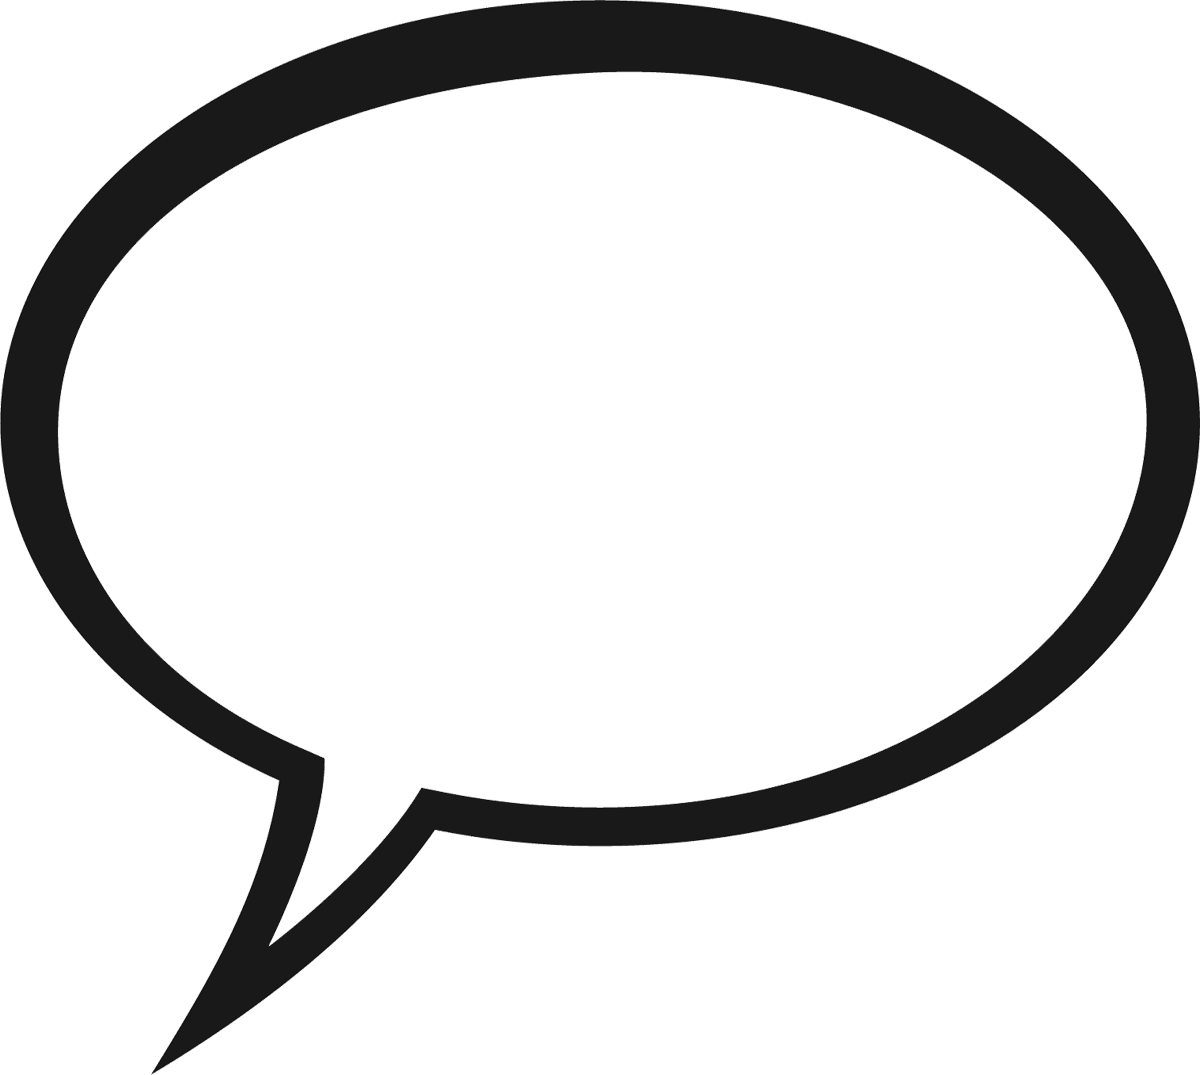 Speech bubble png clipart with transparent background